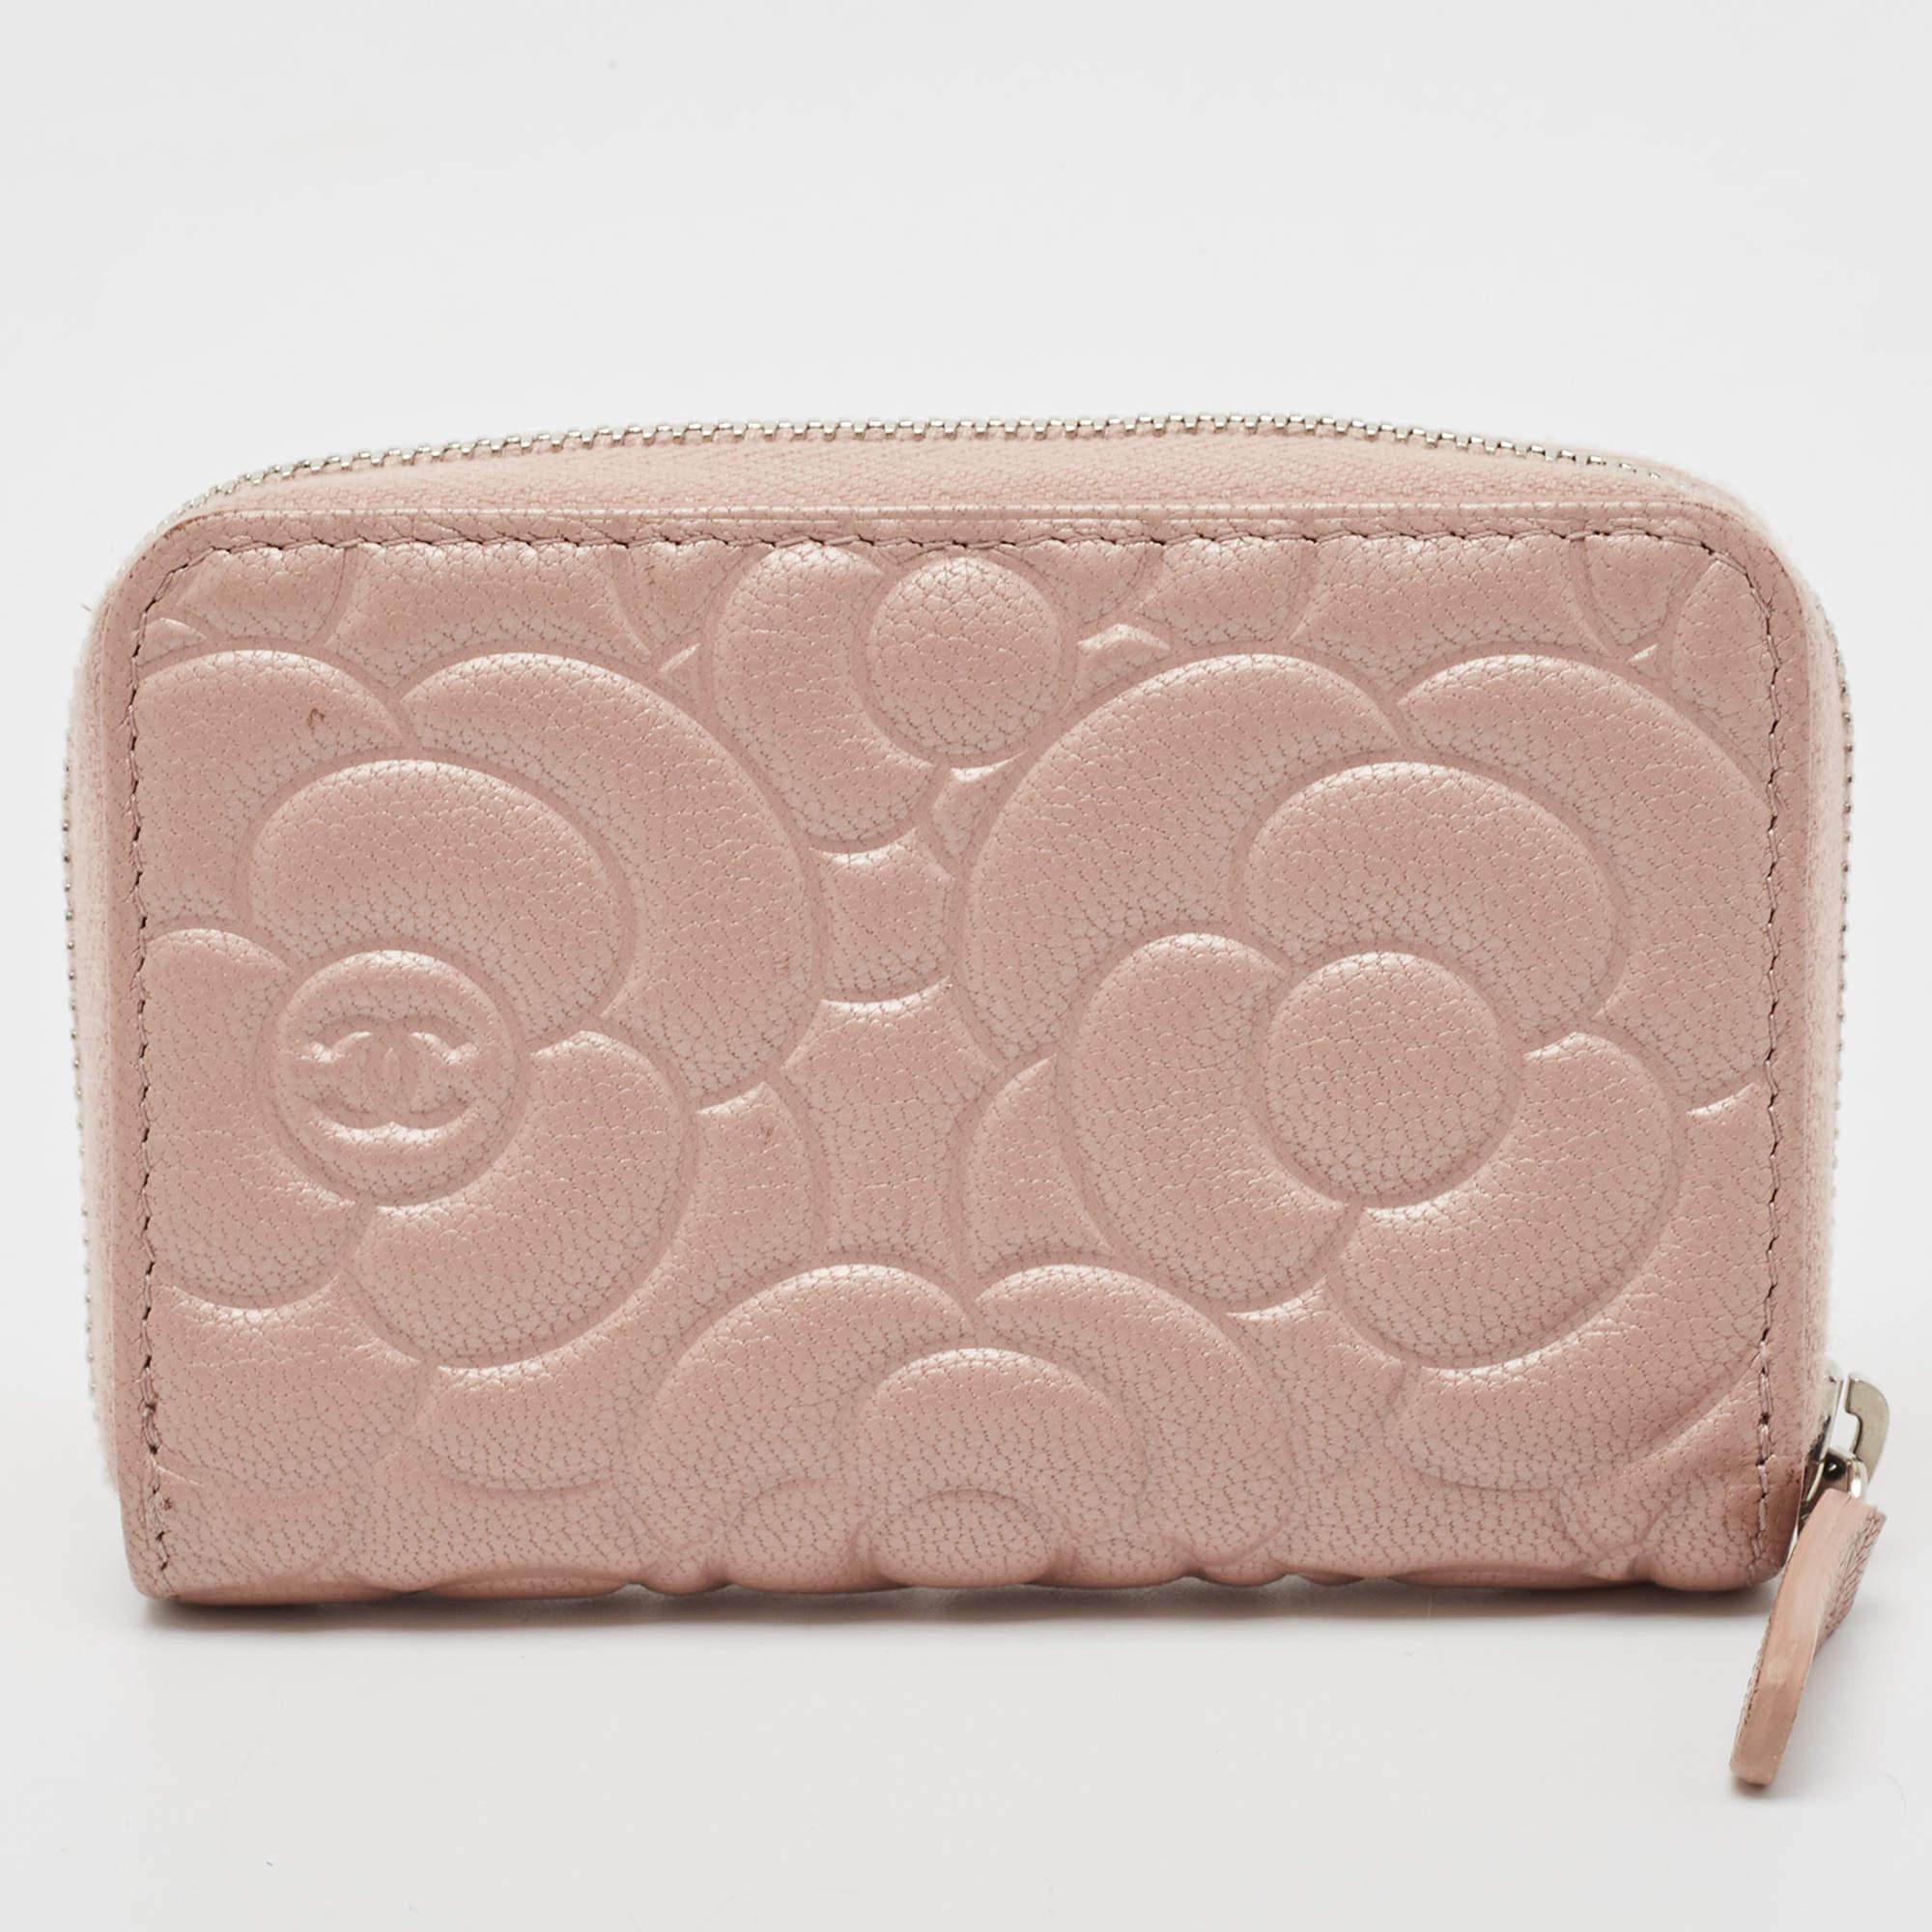 Chanel Pink Camellia Embossed Leather Zip Around Coin Purse In Excellent Condition For Sale In Dubai, Al Qouz 2